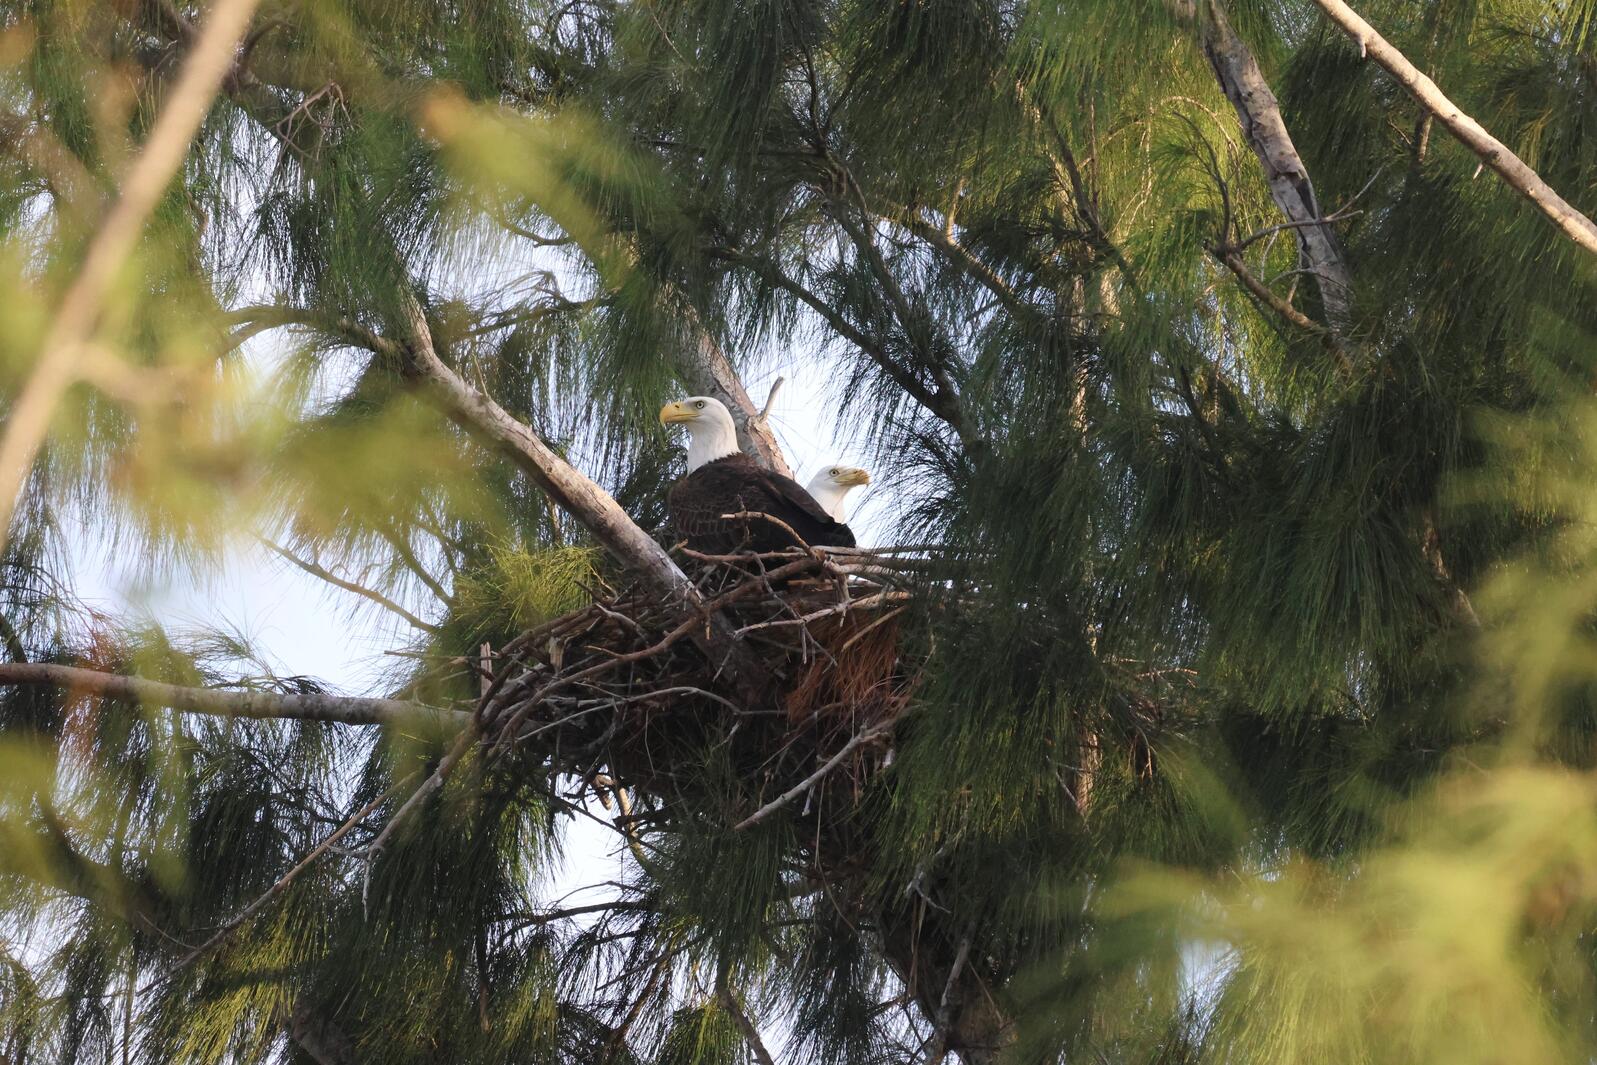 A pair of Bald Eagles sit in a nest surrounded by trees.